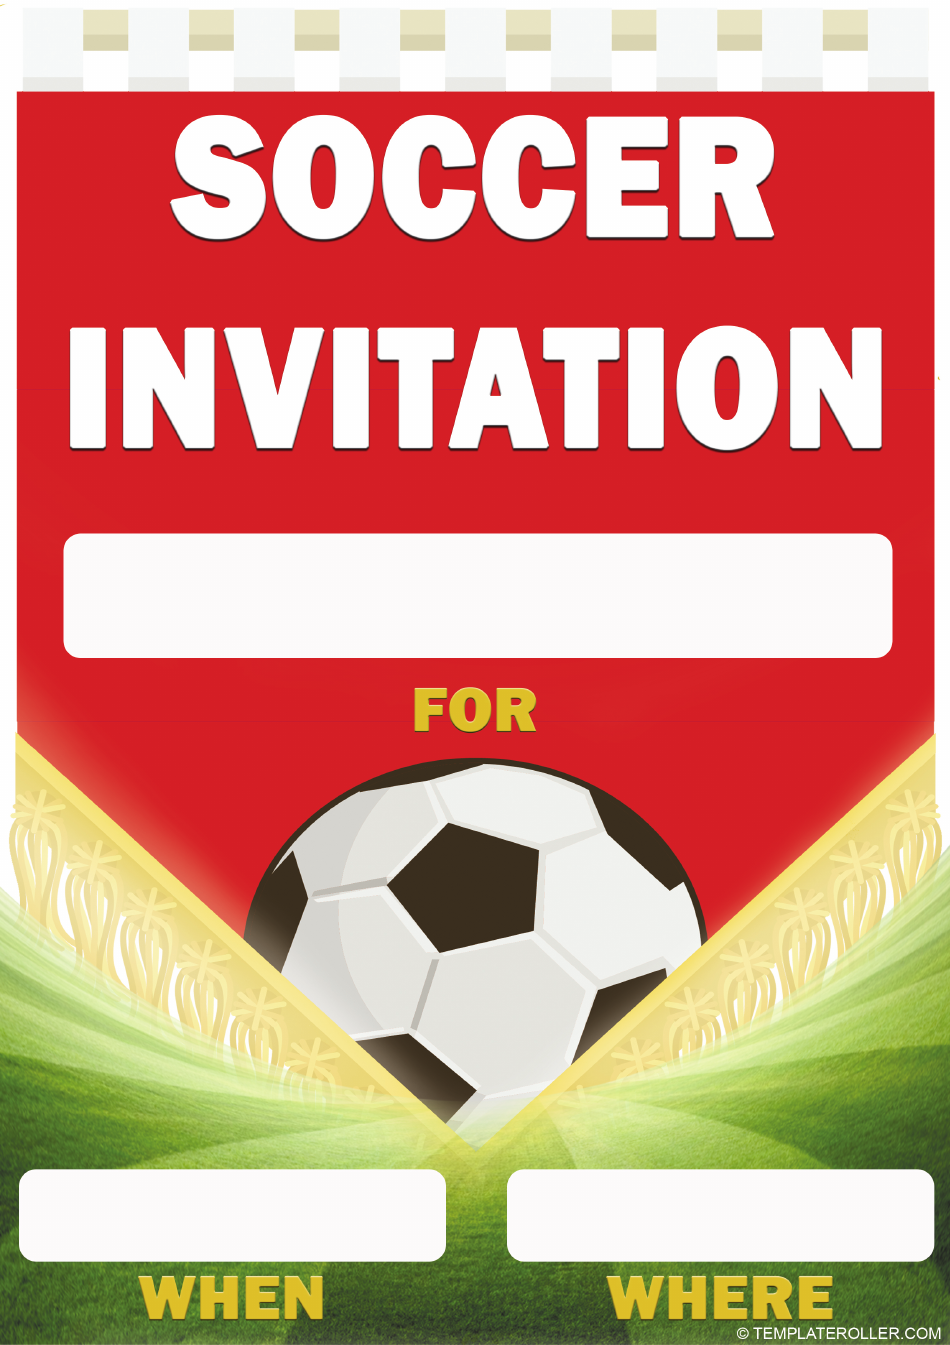 Soccer Invitation Template in Red and Green